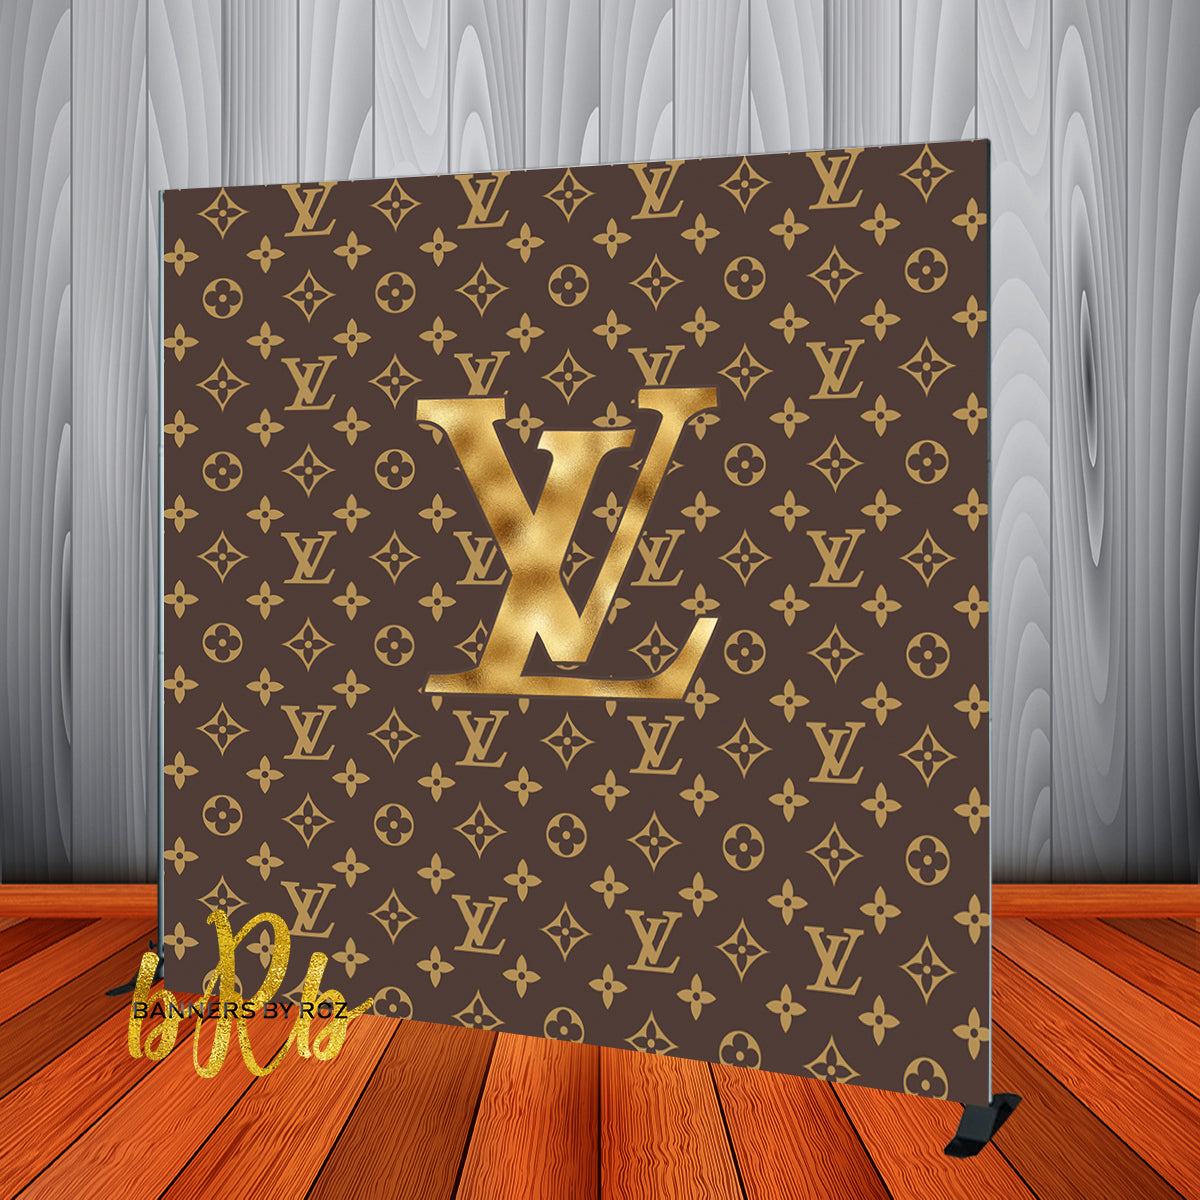 Louis V inspired Pink and Gold inspired Backdrop - Step & Repeat -  Designed, Printed & Shipped!